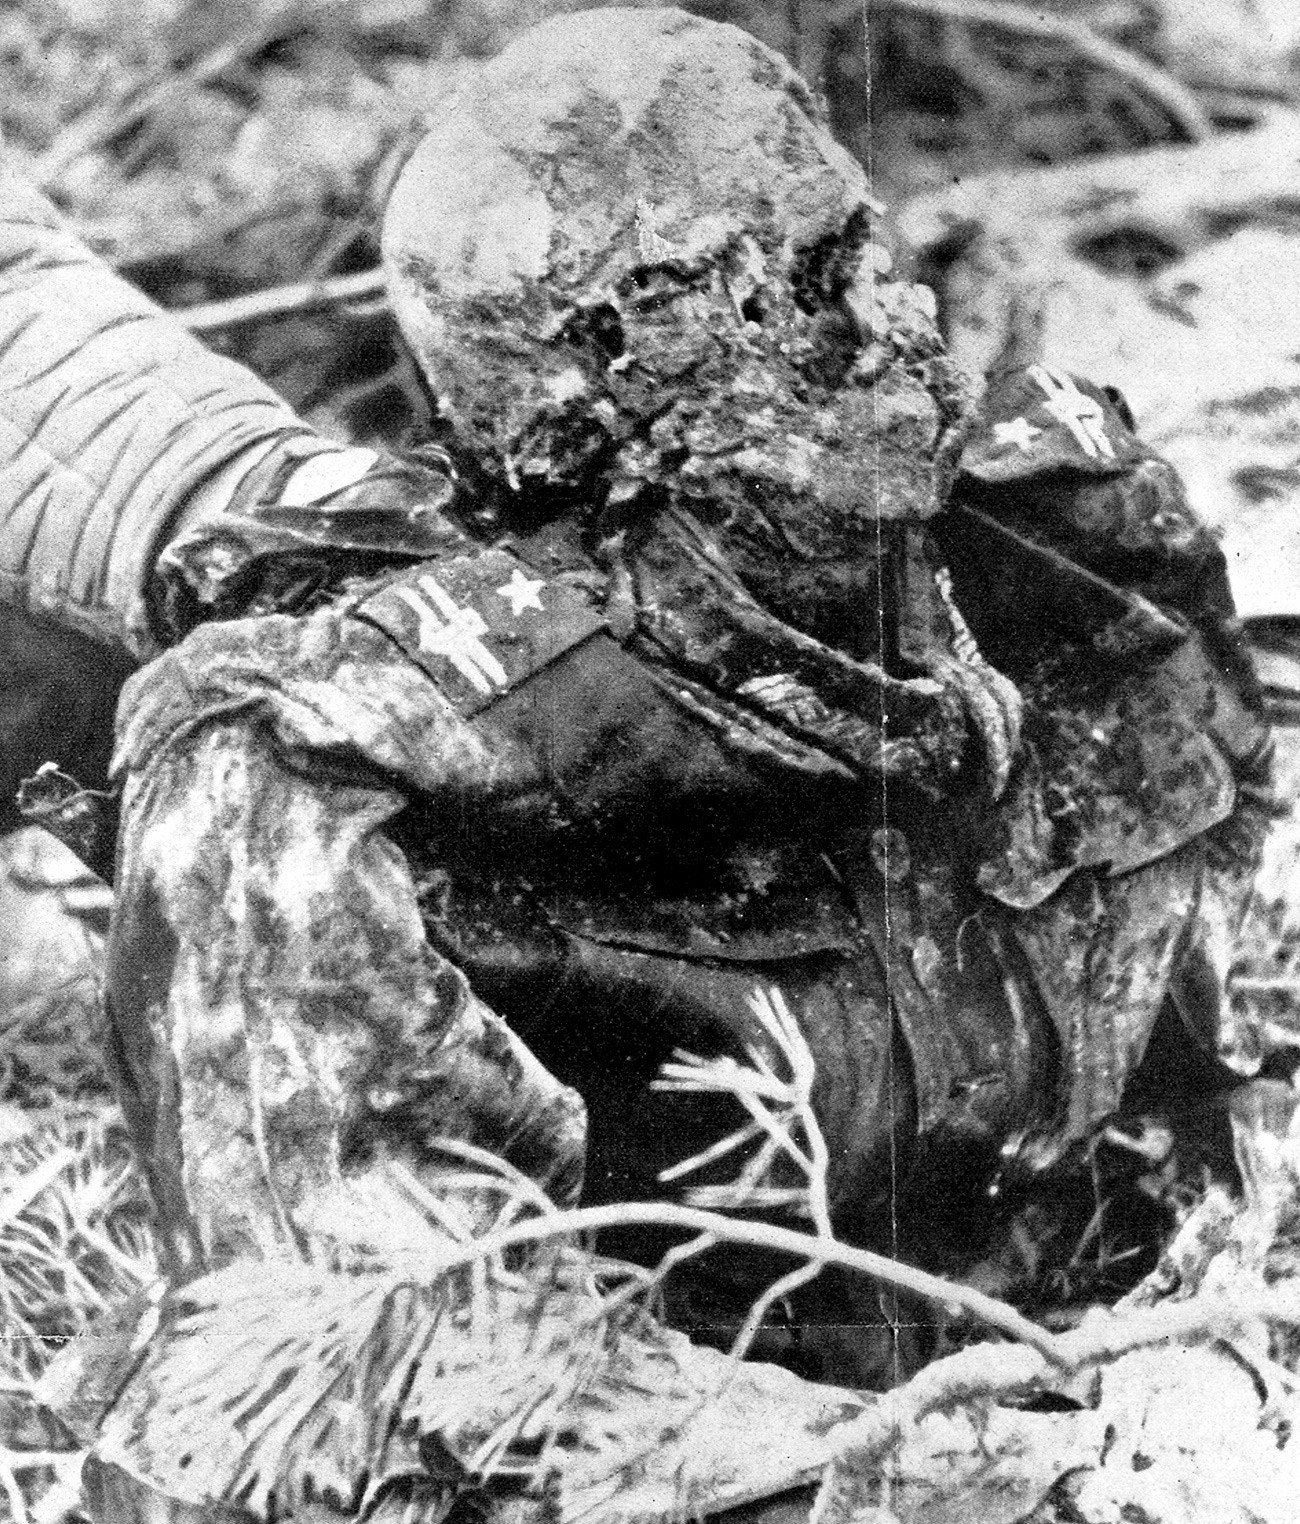 The corpse of a Polish commander (major) is found in some pits, discovered by the Germans in April, 1943 in the forest of Katyn ( Byelorussia).